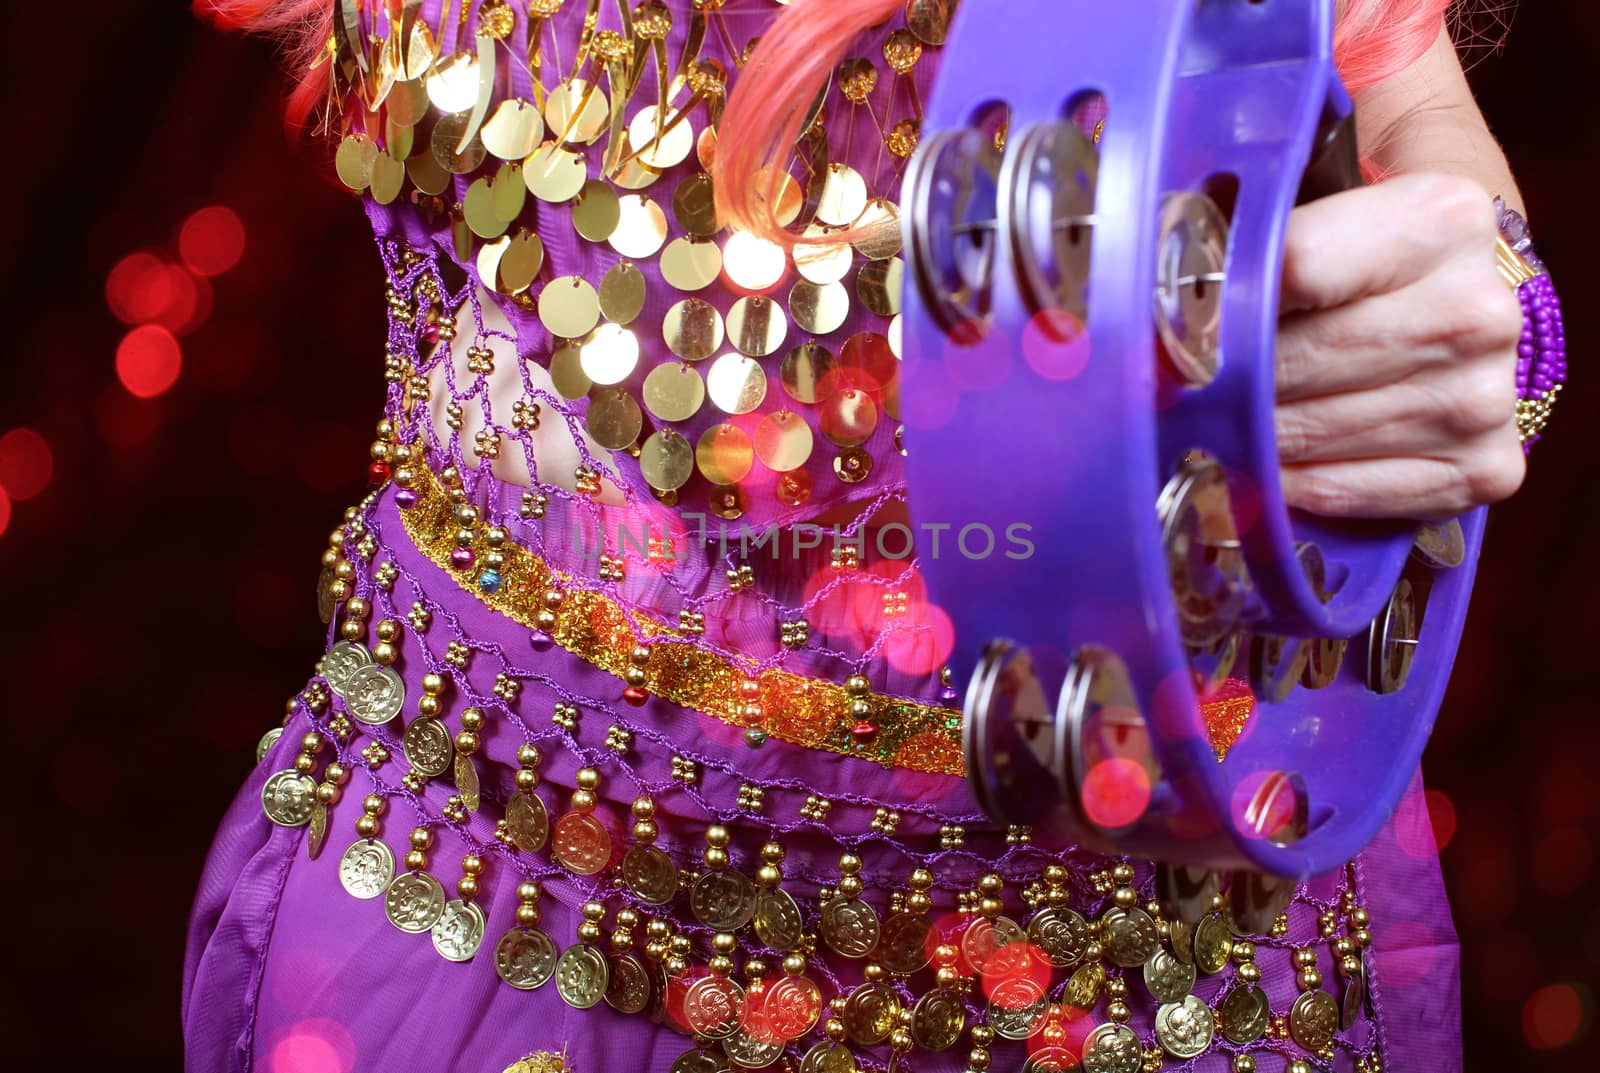 Belly Dancer Close-up with Tambourine by Marti157900